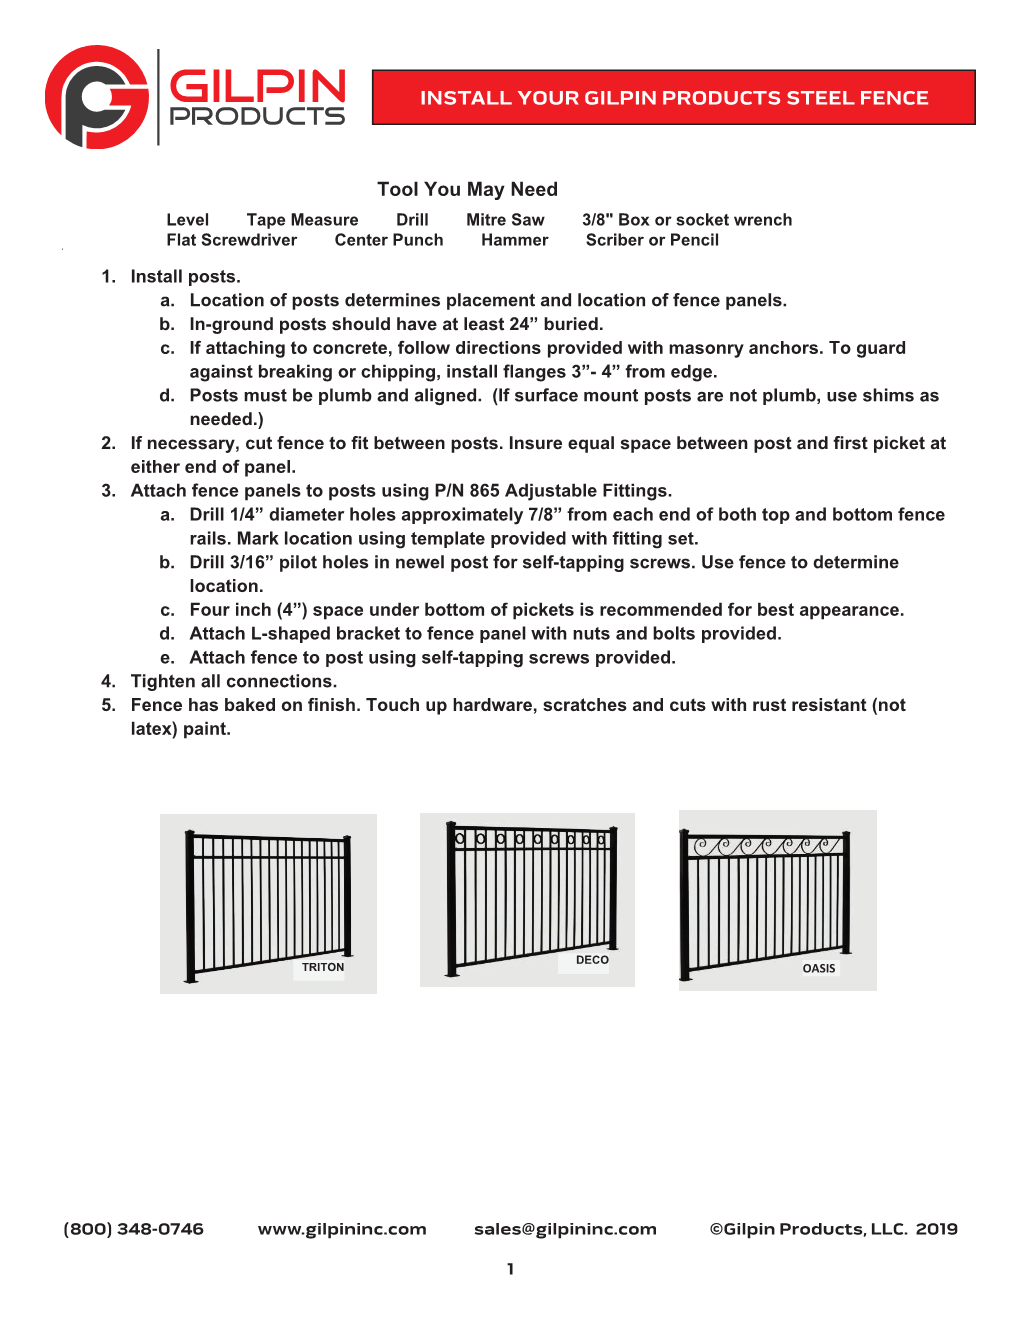 Install Your Gilpin Products Steel Fence